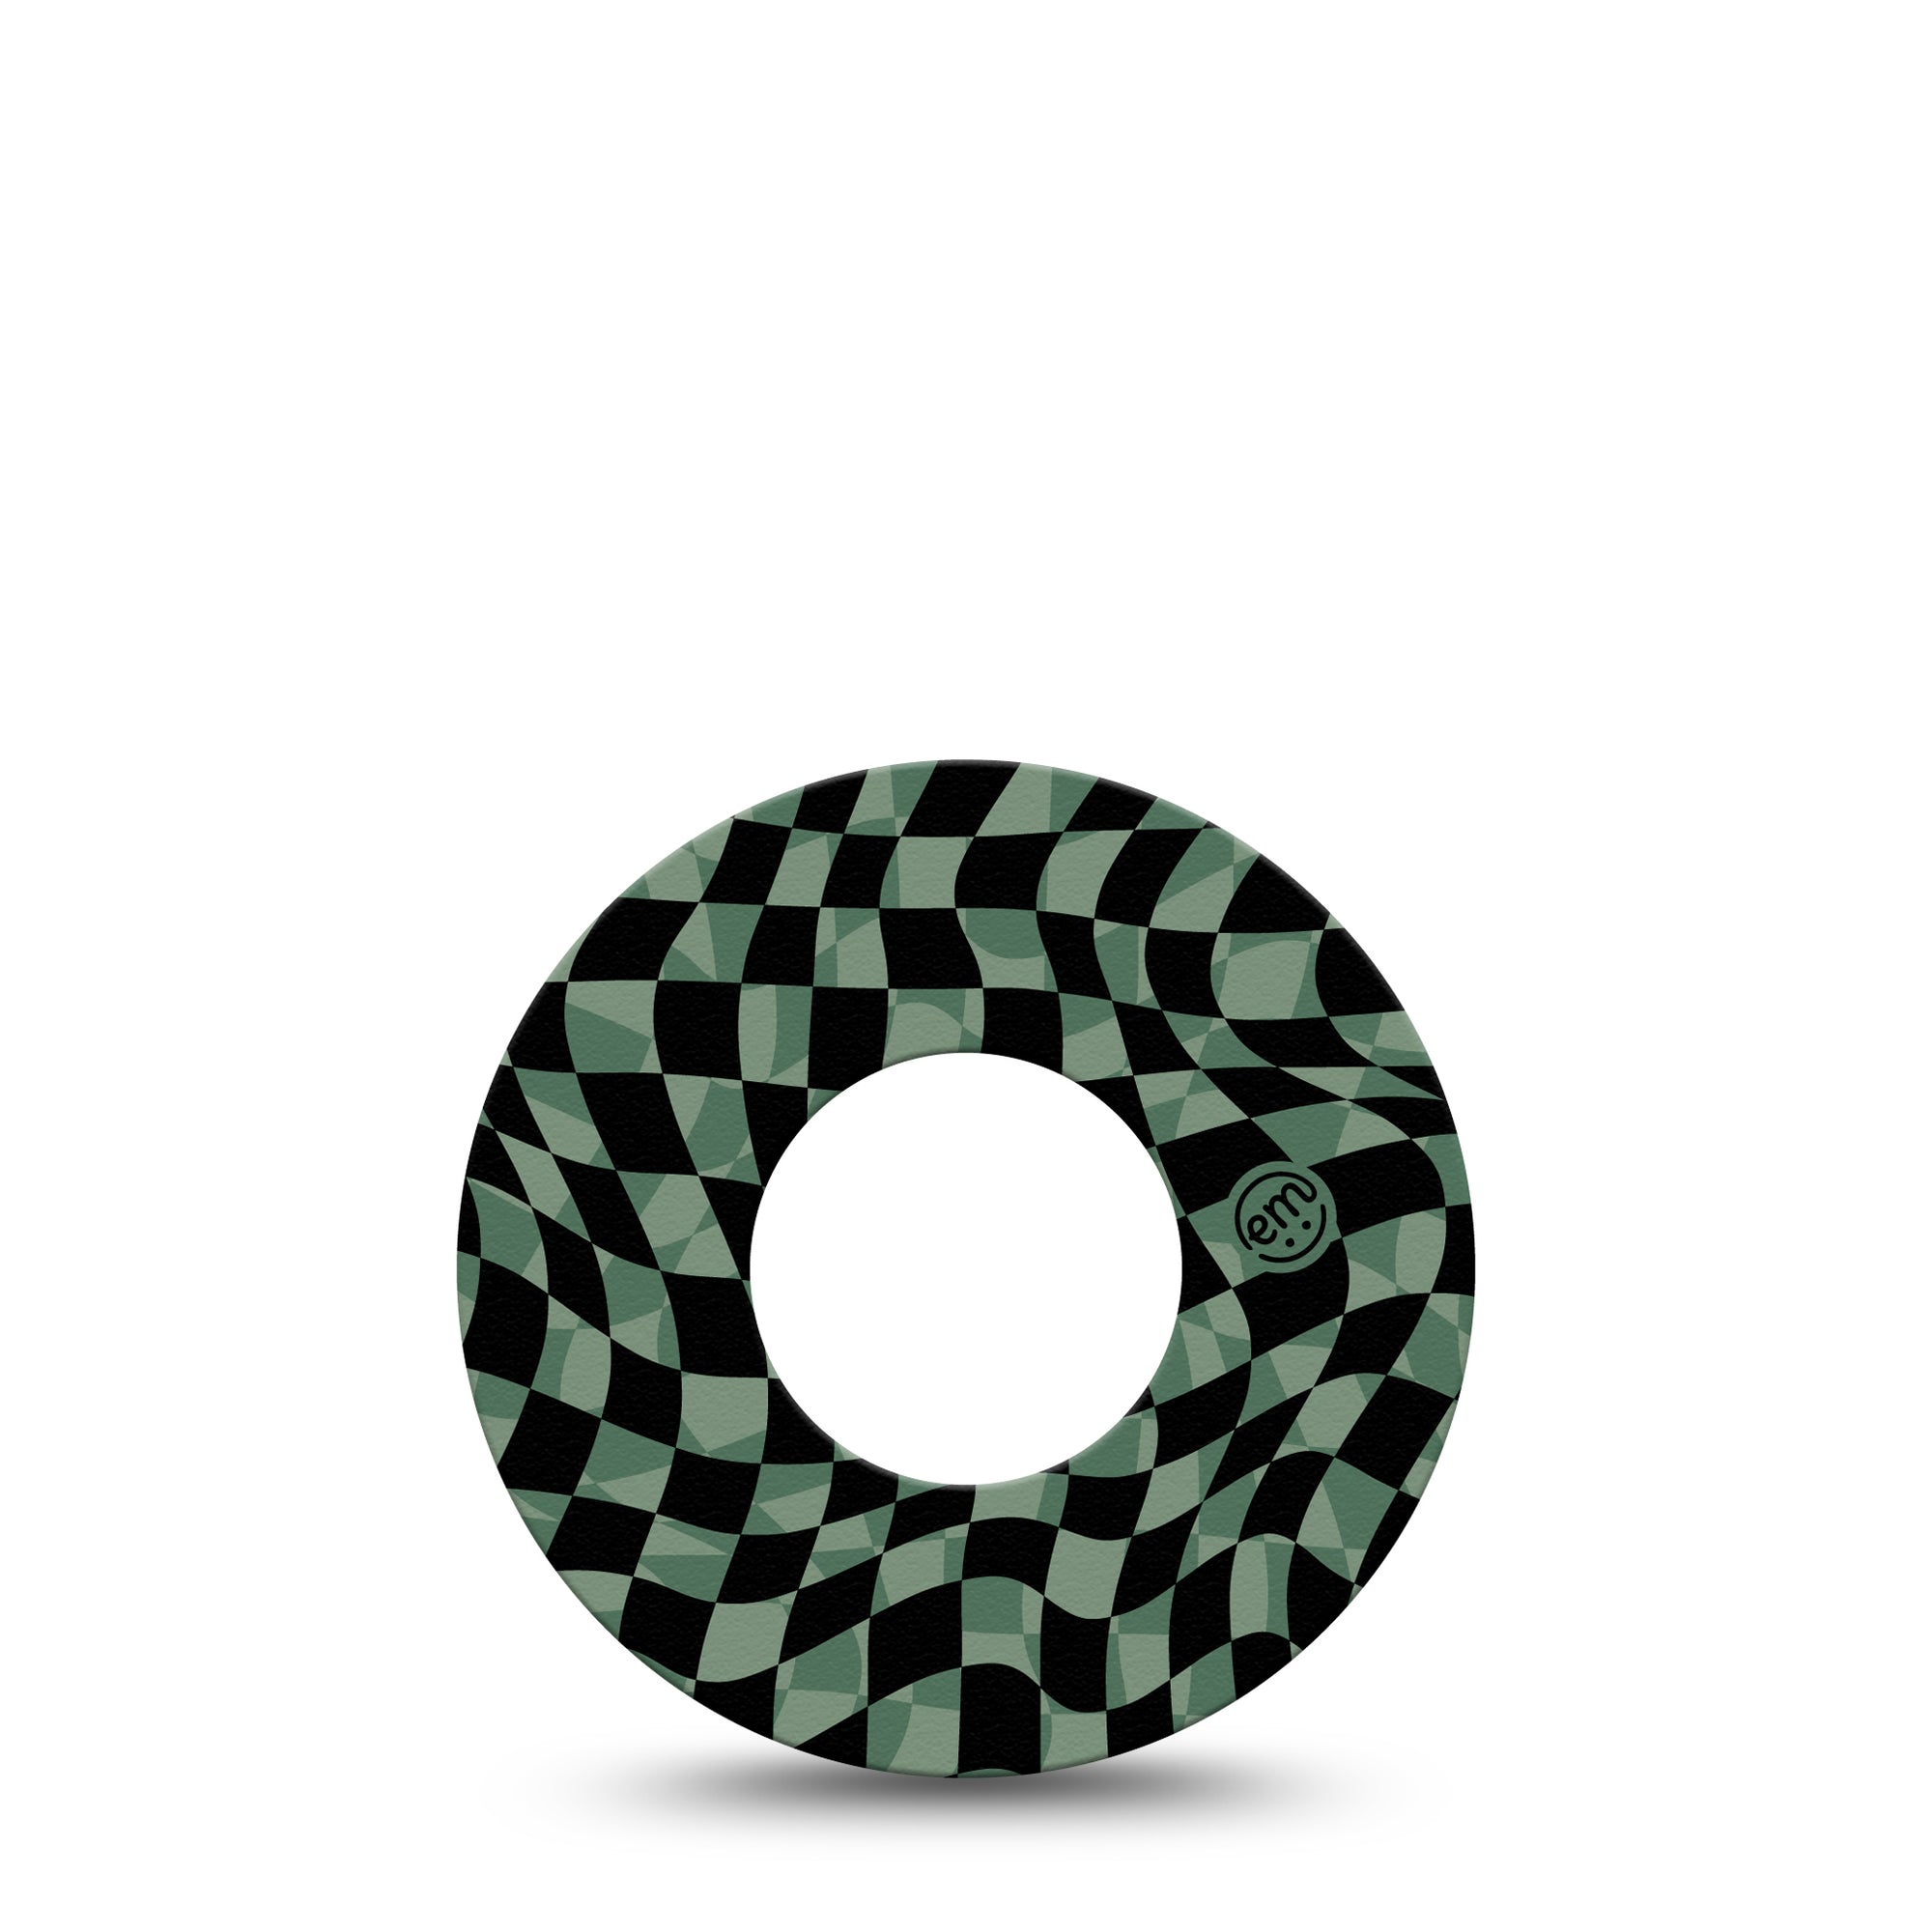 ExpressionMed Green & Black Checkerboard Libre 2 Tape, Distorted Checkered Inspired, CGM, Plaster Patch Design, Abbott Lingo